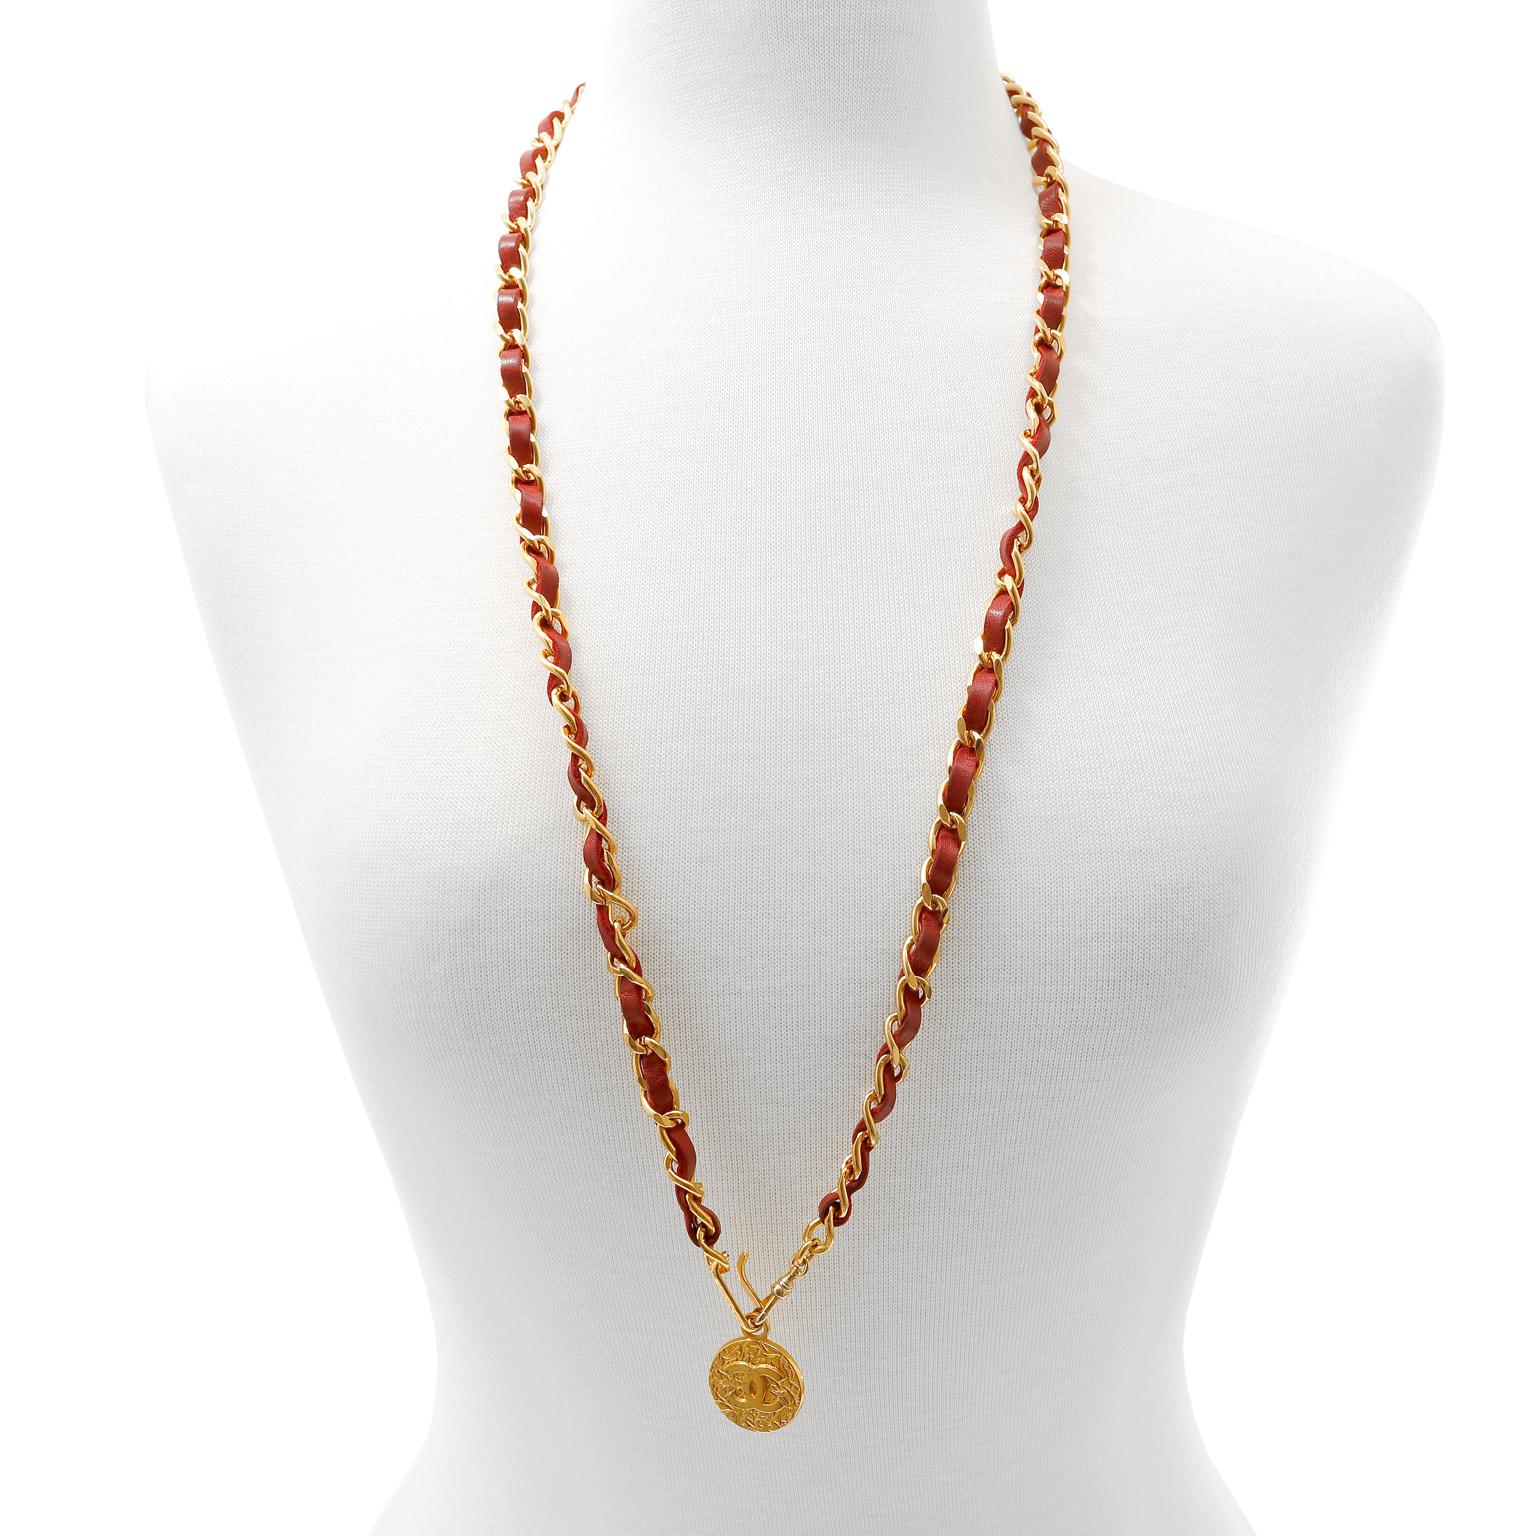 This authentic Chanel Red Leather and Chain Medallion Belt Necklace is in excellent vintage condition.  Red leather is interwoven with 24 karat gold plated chain, measuring approximately 36 inches.  A textured gold tone CC medallion dangles from the